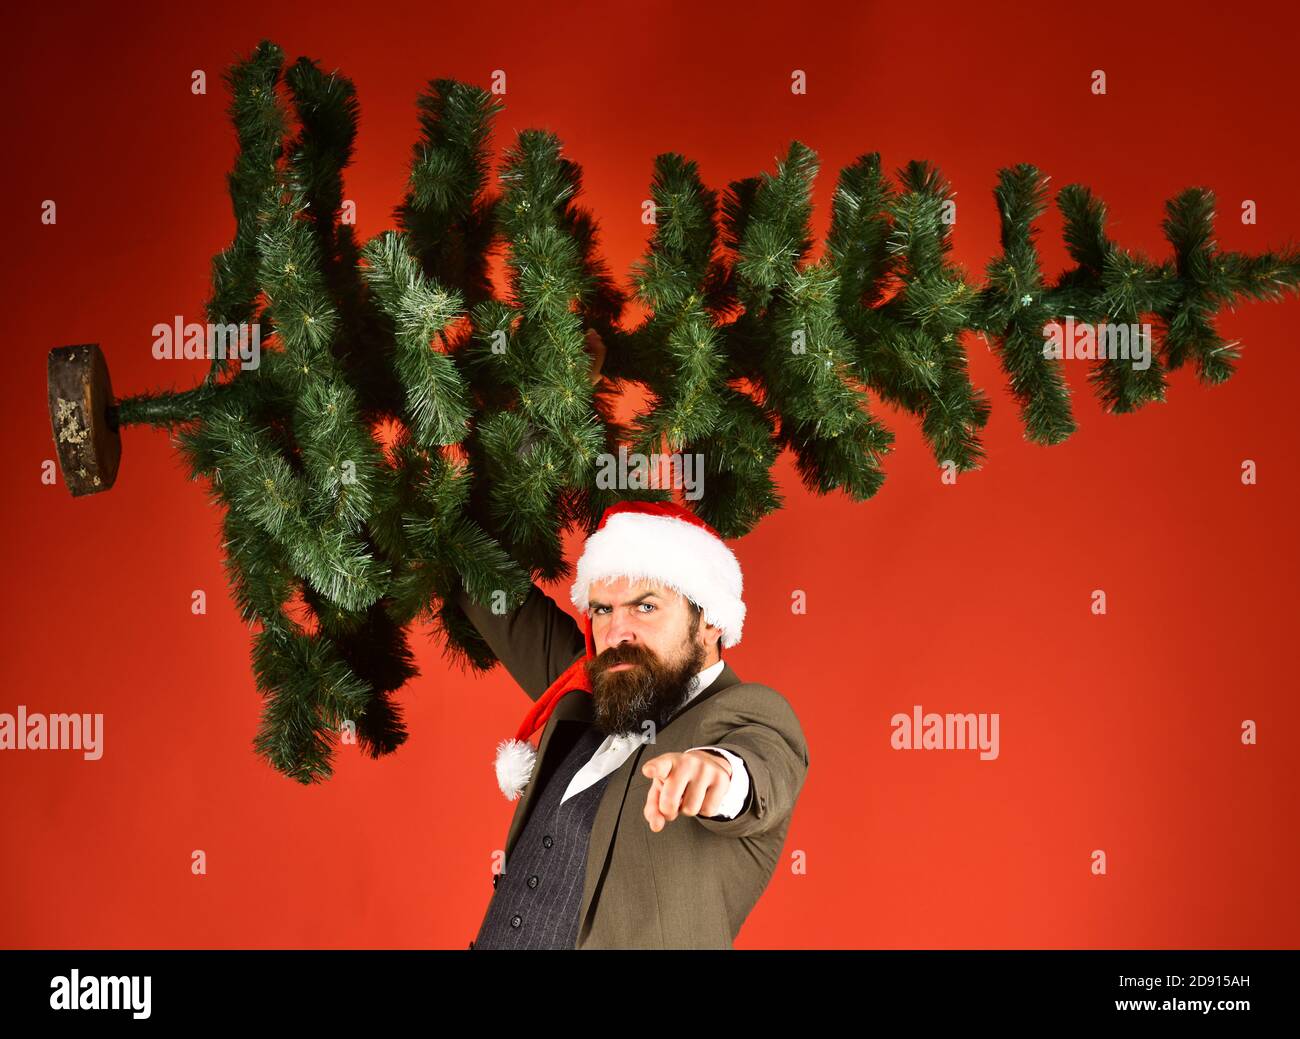 Businessman carrying christmas tree on red background. Office Christmas  decor concept Stock Photo - Alamy